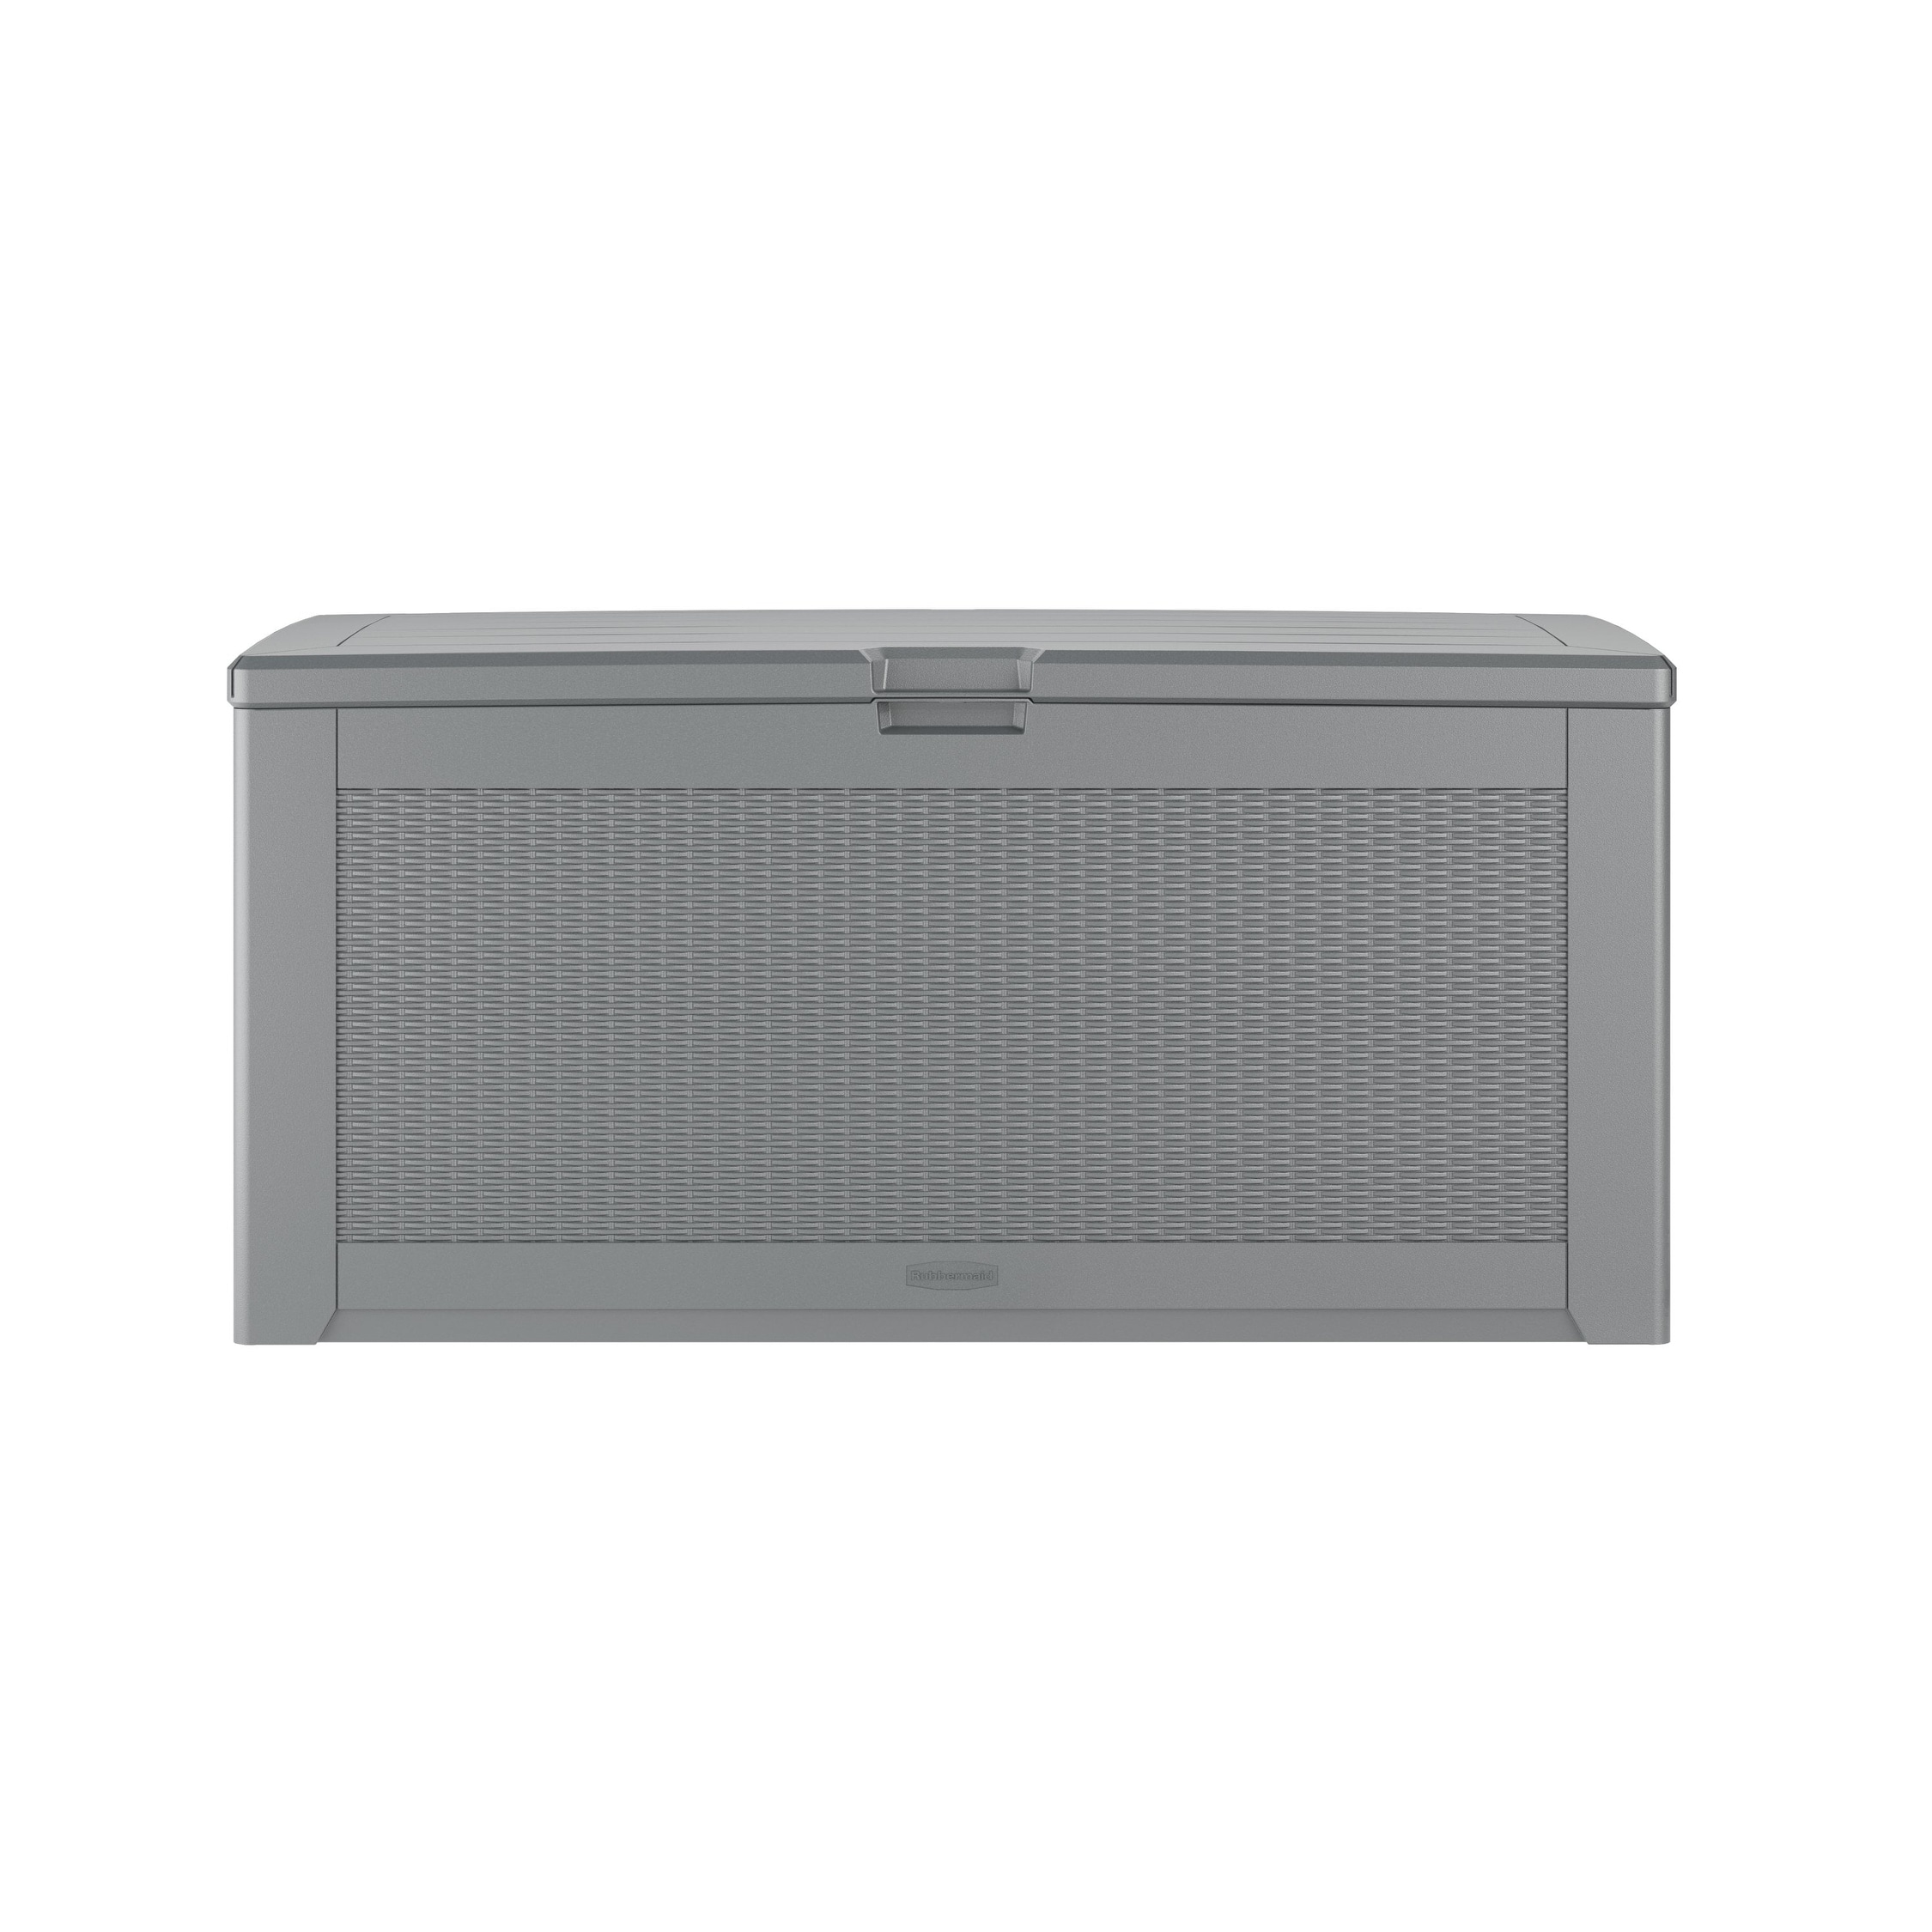 Rubbermaid Deck Box with Seat Large